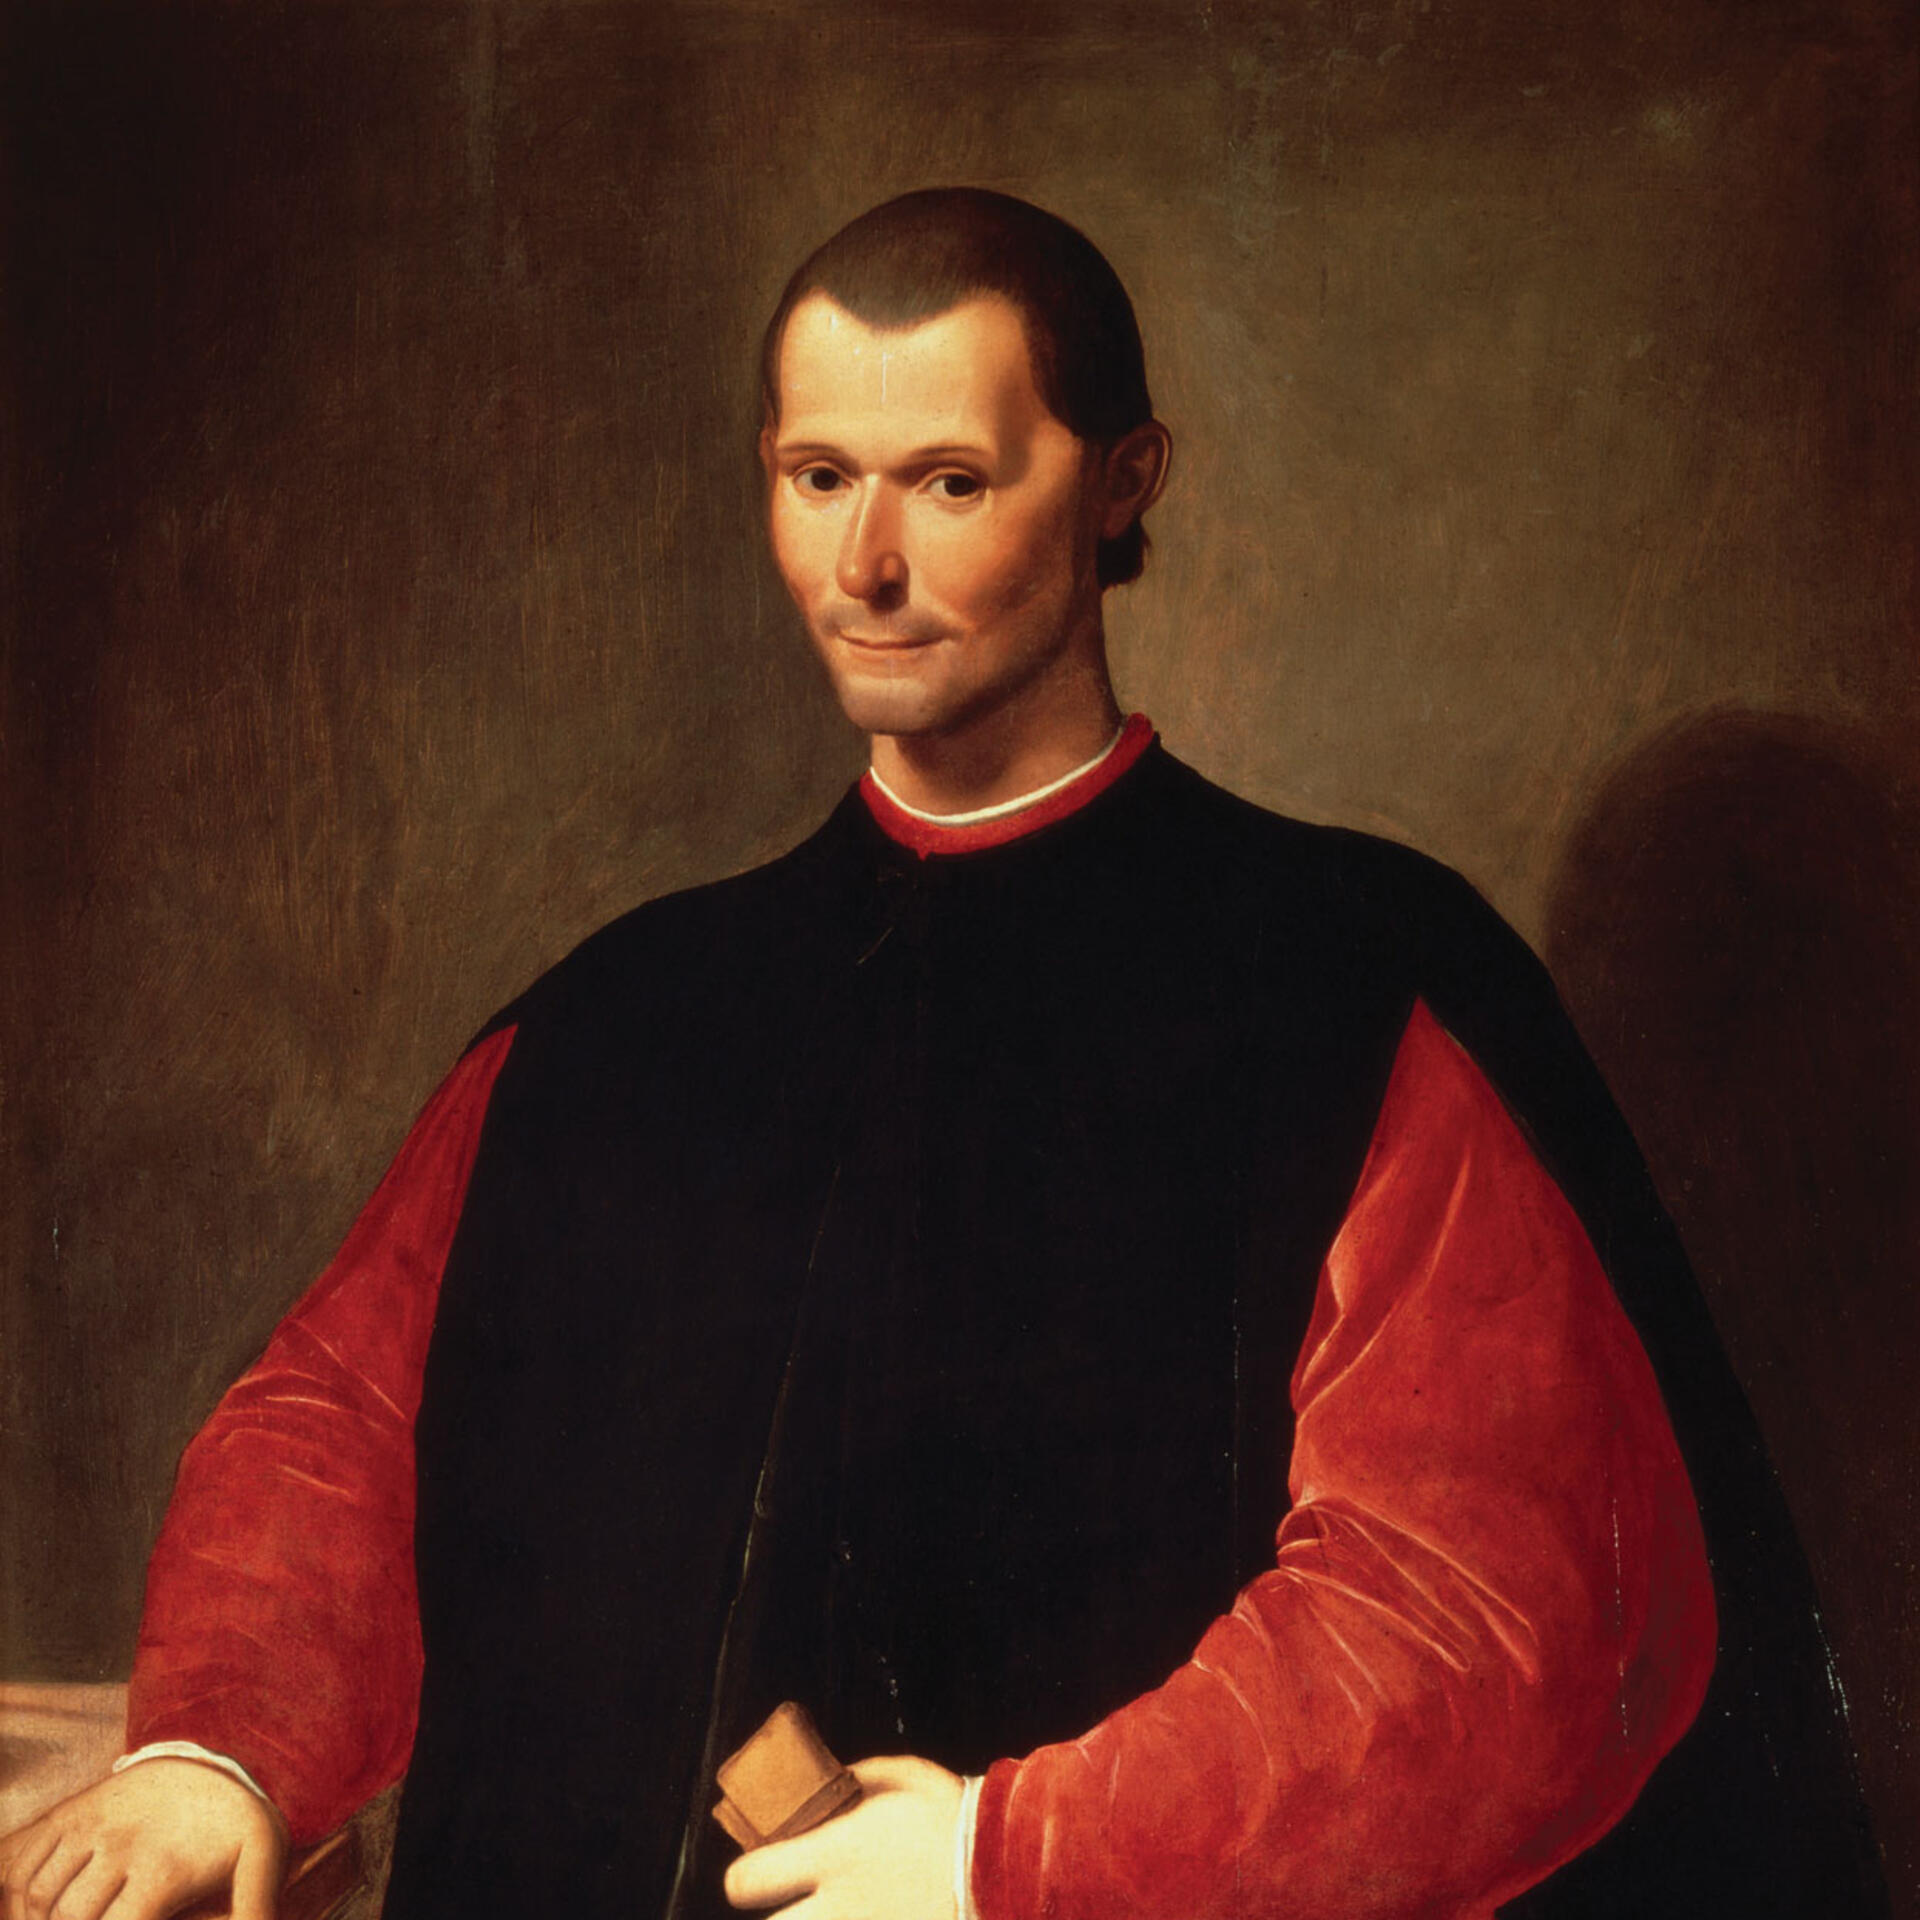 machiavelli the qualities of the prince